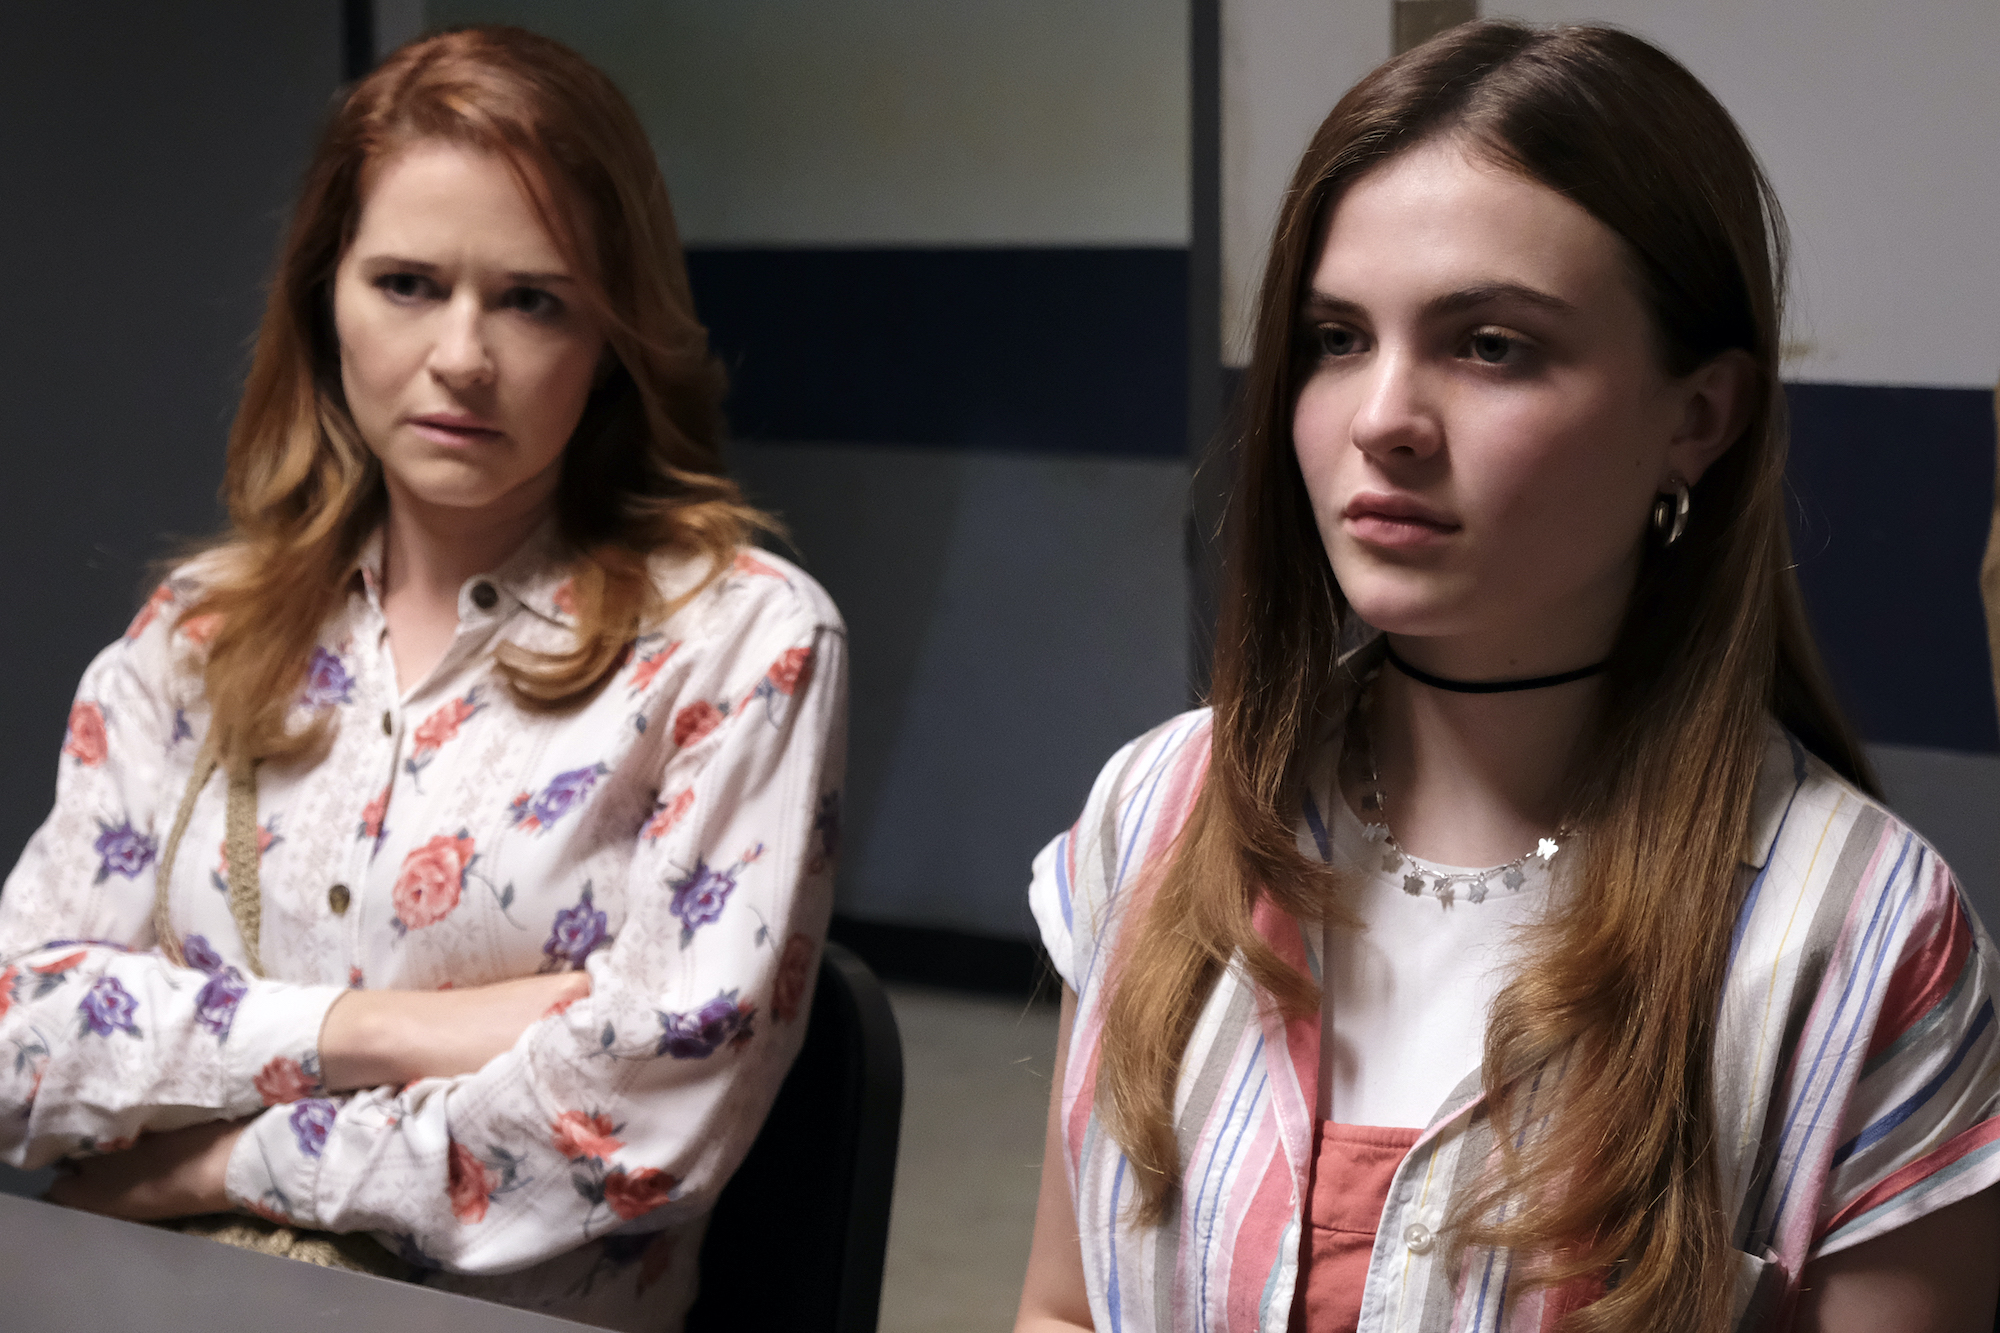 'CRUEL SUMMER' episode 3, "Off With a Bang": Sarah Drew as Cindy Turner and Chiara Aurelia as Jeanette Turner